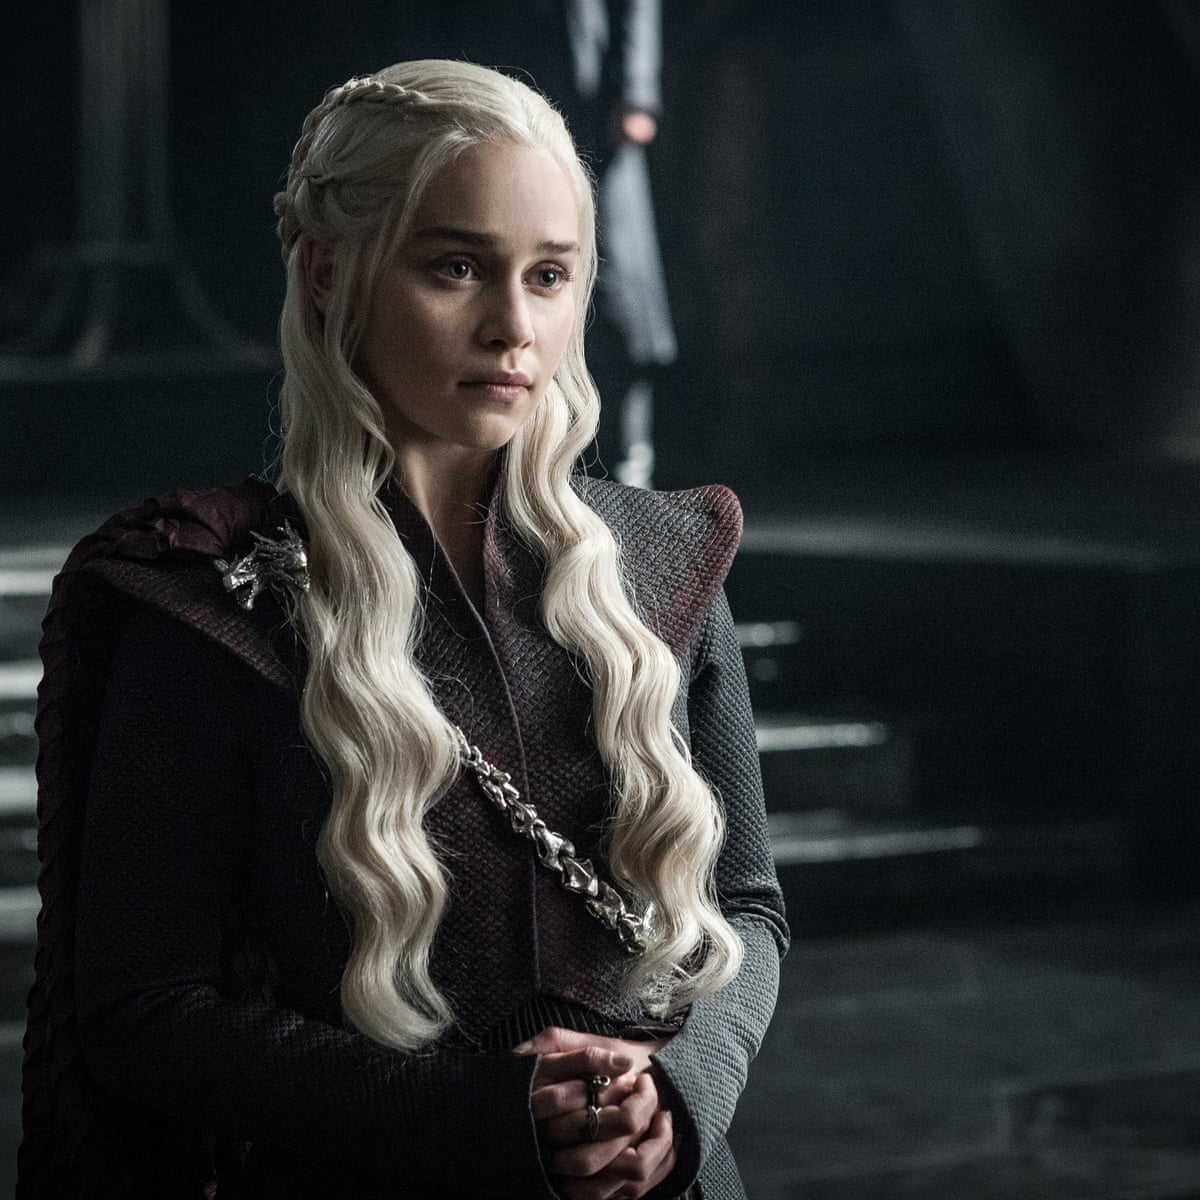 Seven things we learned from the new Game of Thrones photos | Game of Thrones | The Guardian